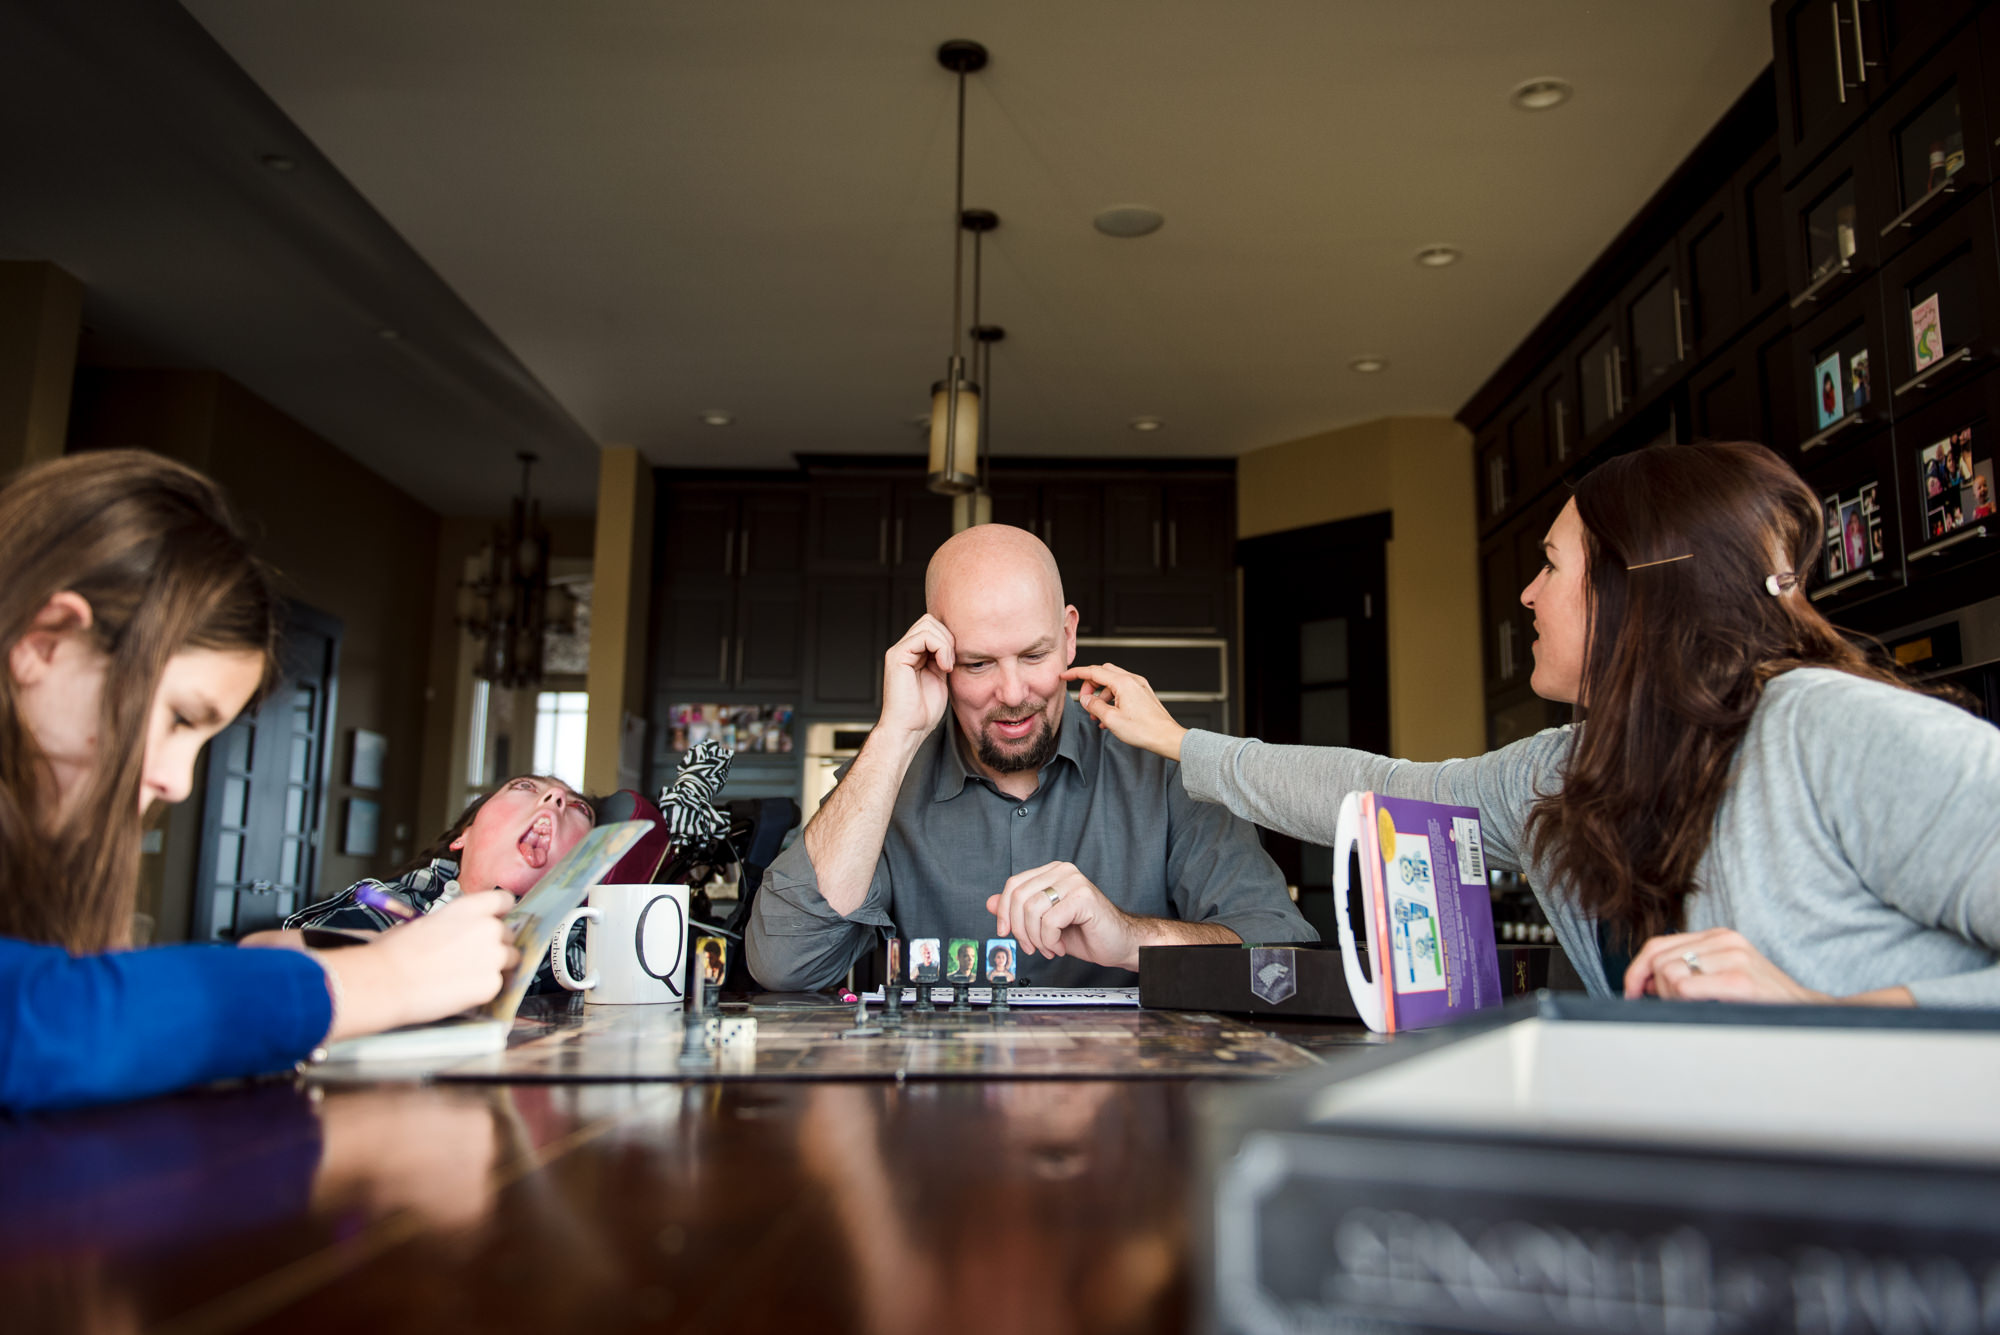 A family plays a board game as part of their documentary family photo session in their St. Albert home